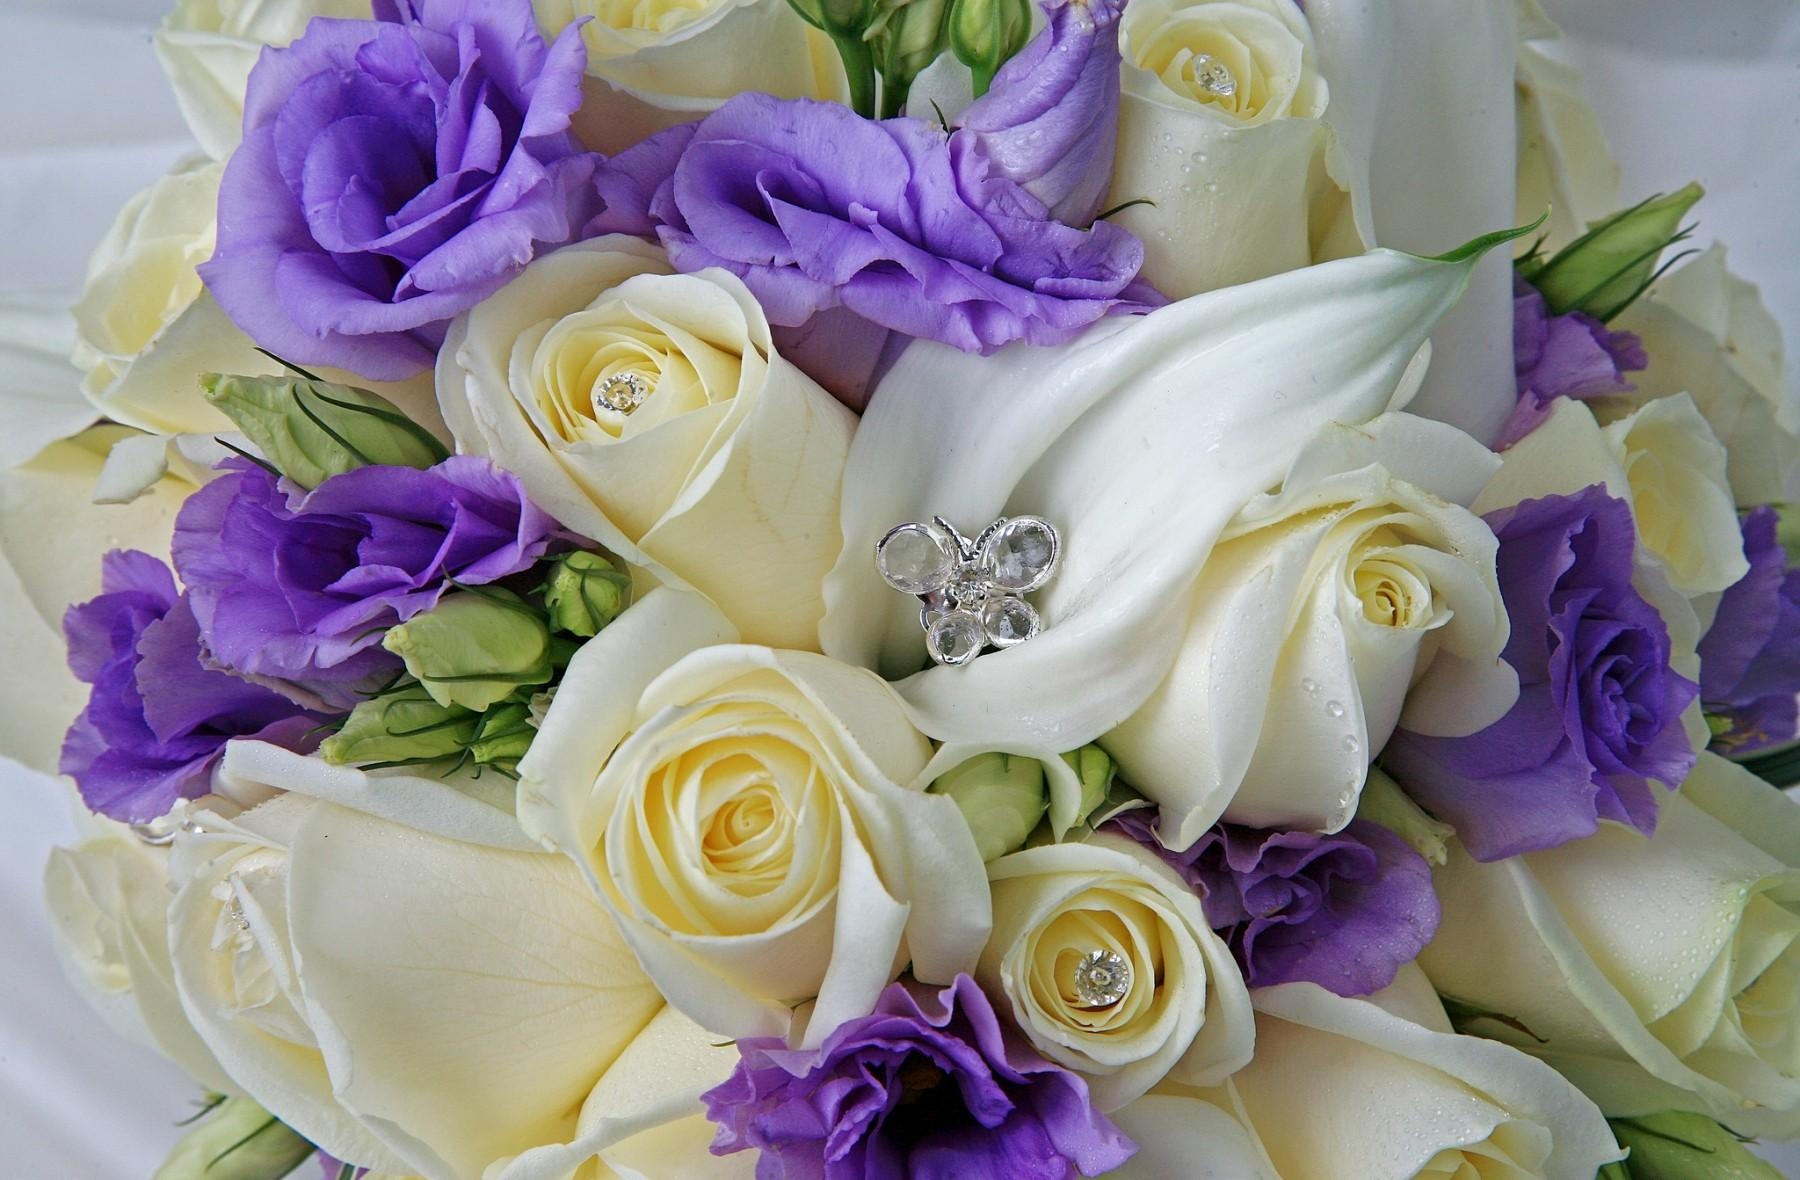 drops, decorations, bouquet, lisianthus russell, roses, lisiantus russell, flowers 4K Ultra